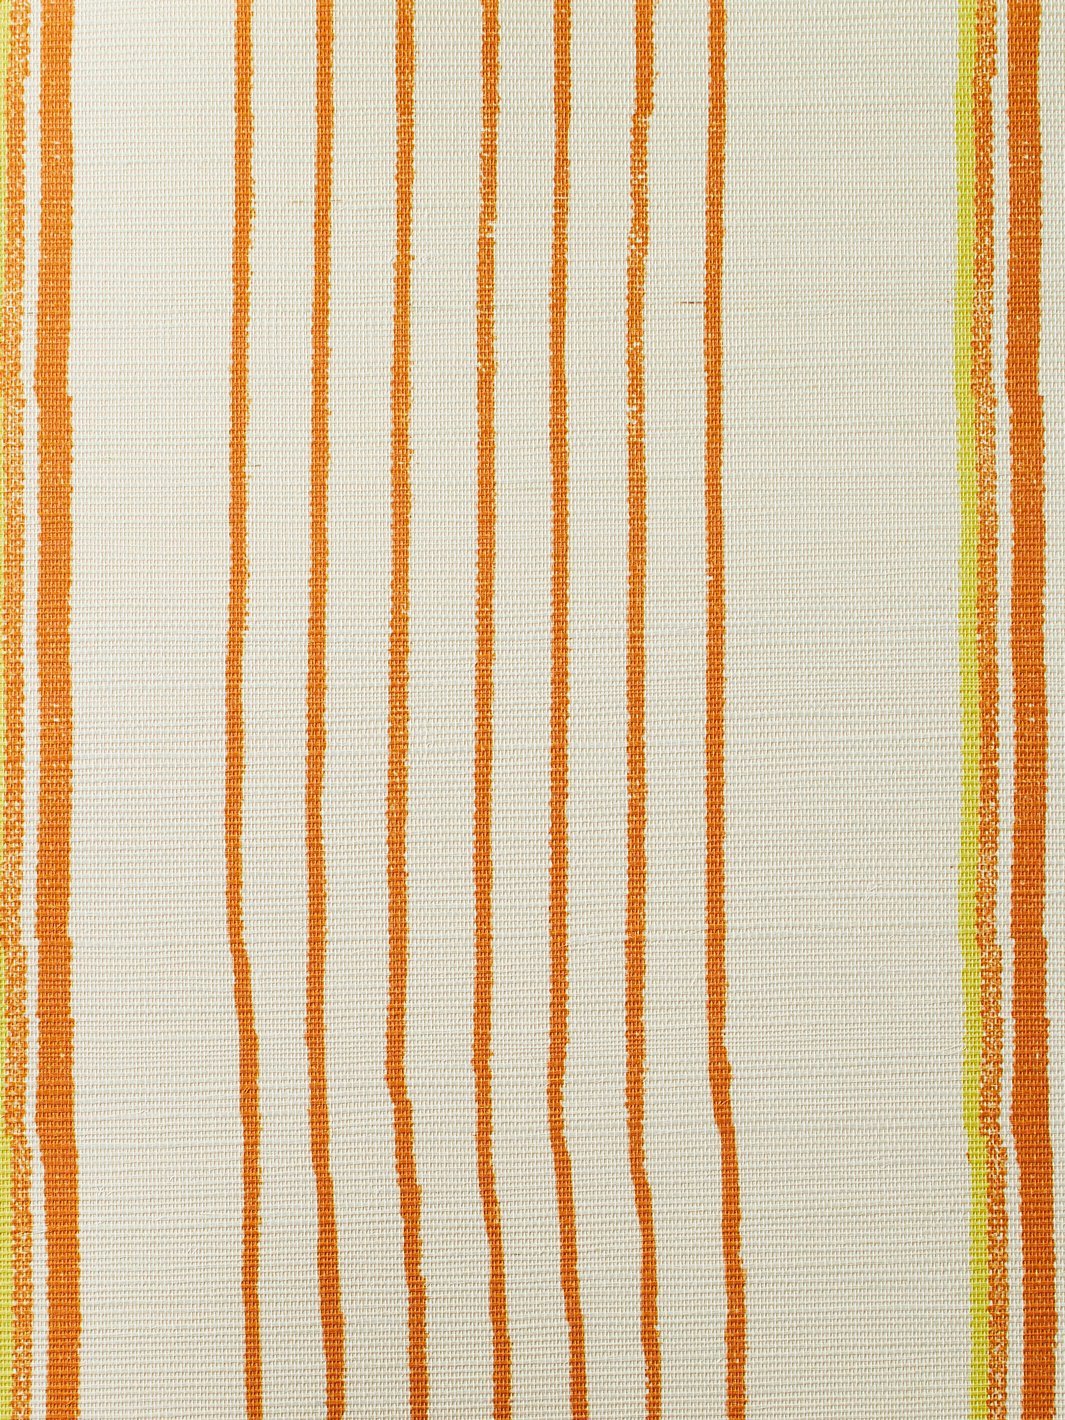 'Two Tone Stripe' Grasscloth' Wallpaper by Nathan Turner - Daffodil Terracotta